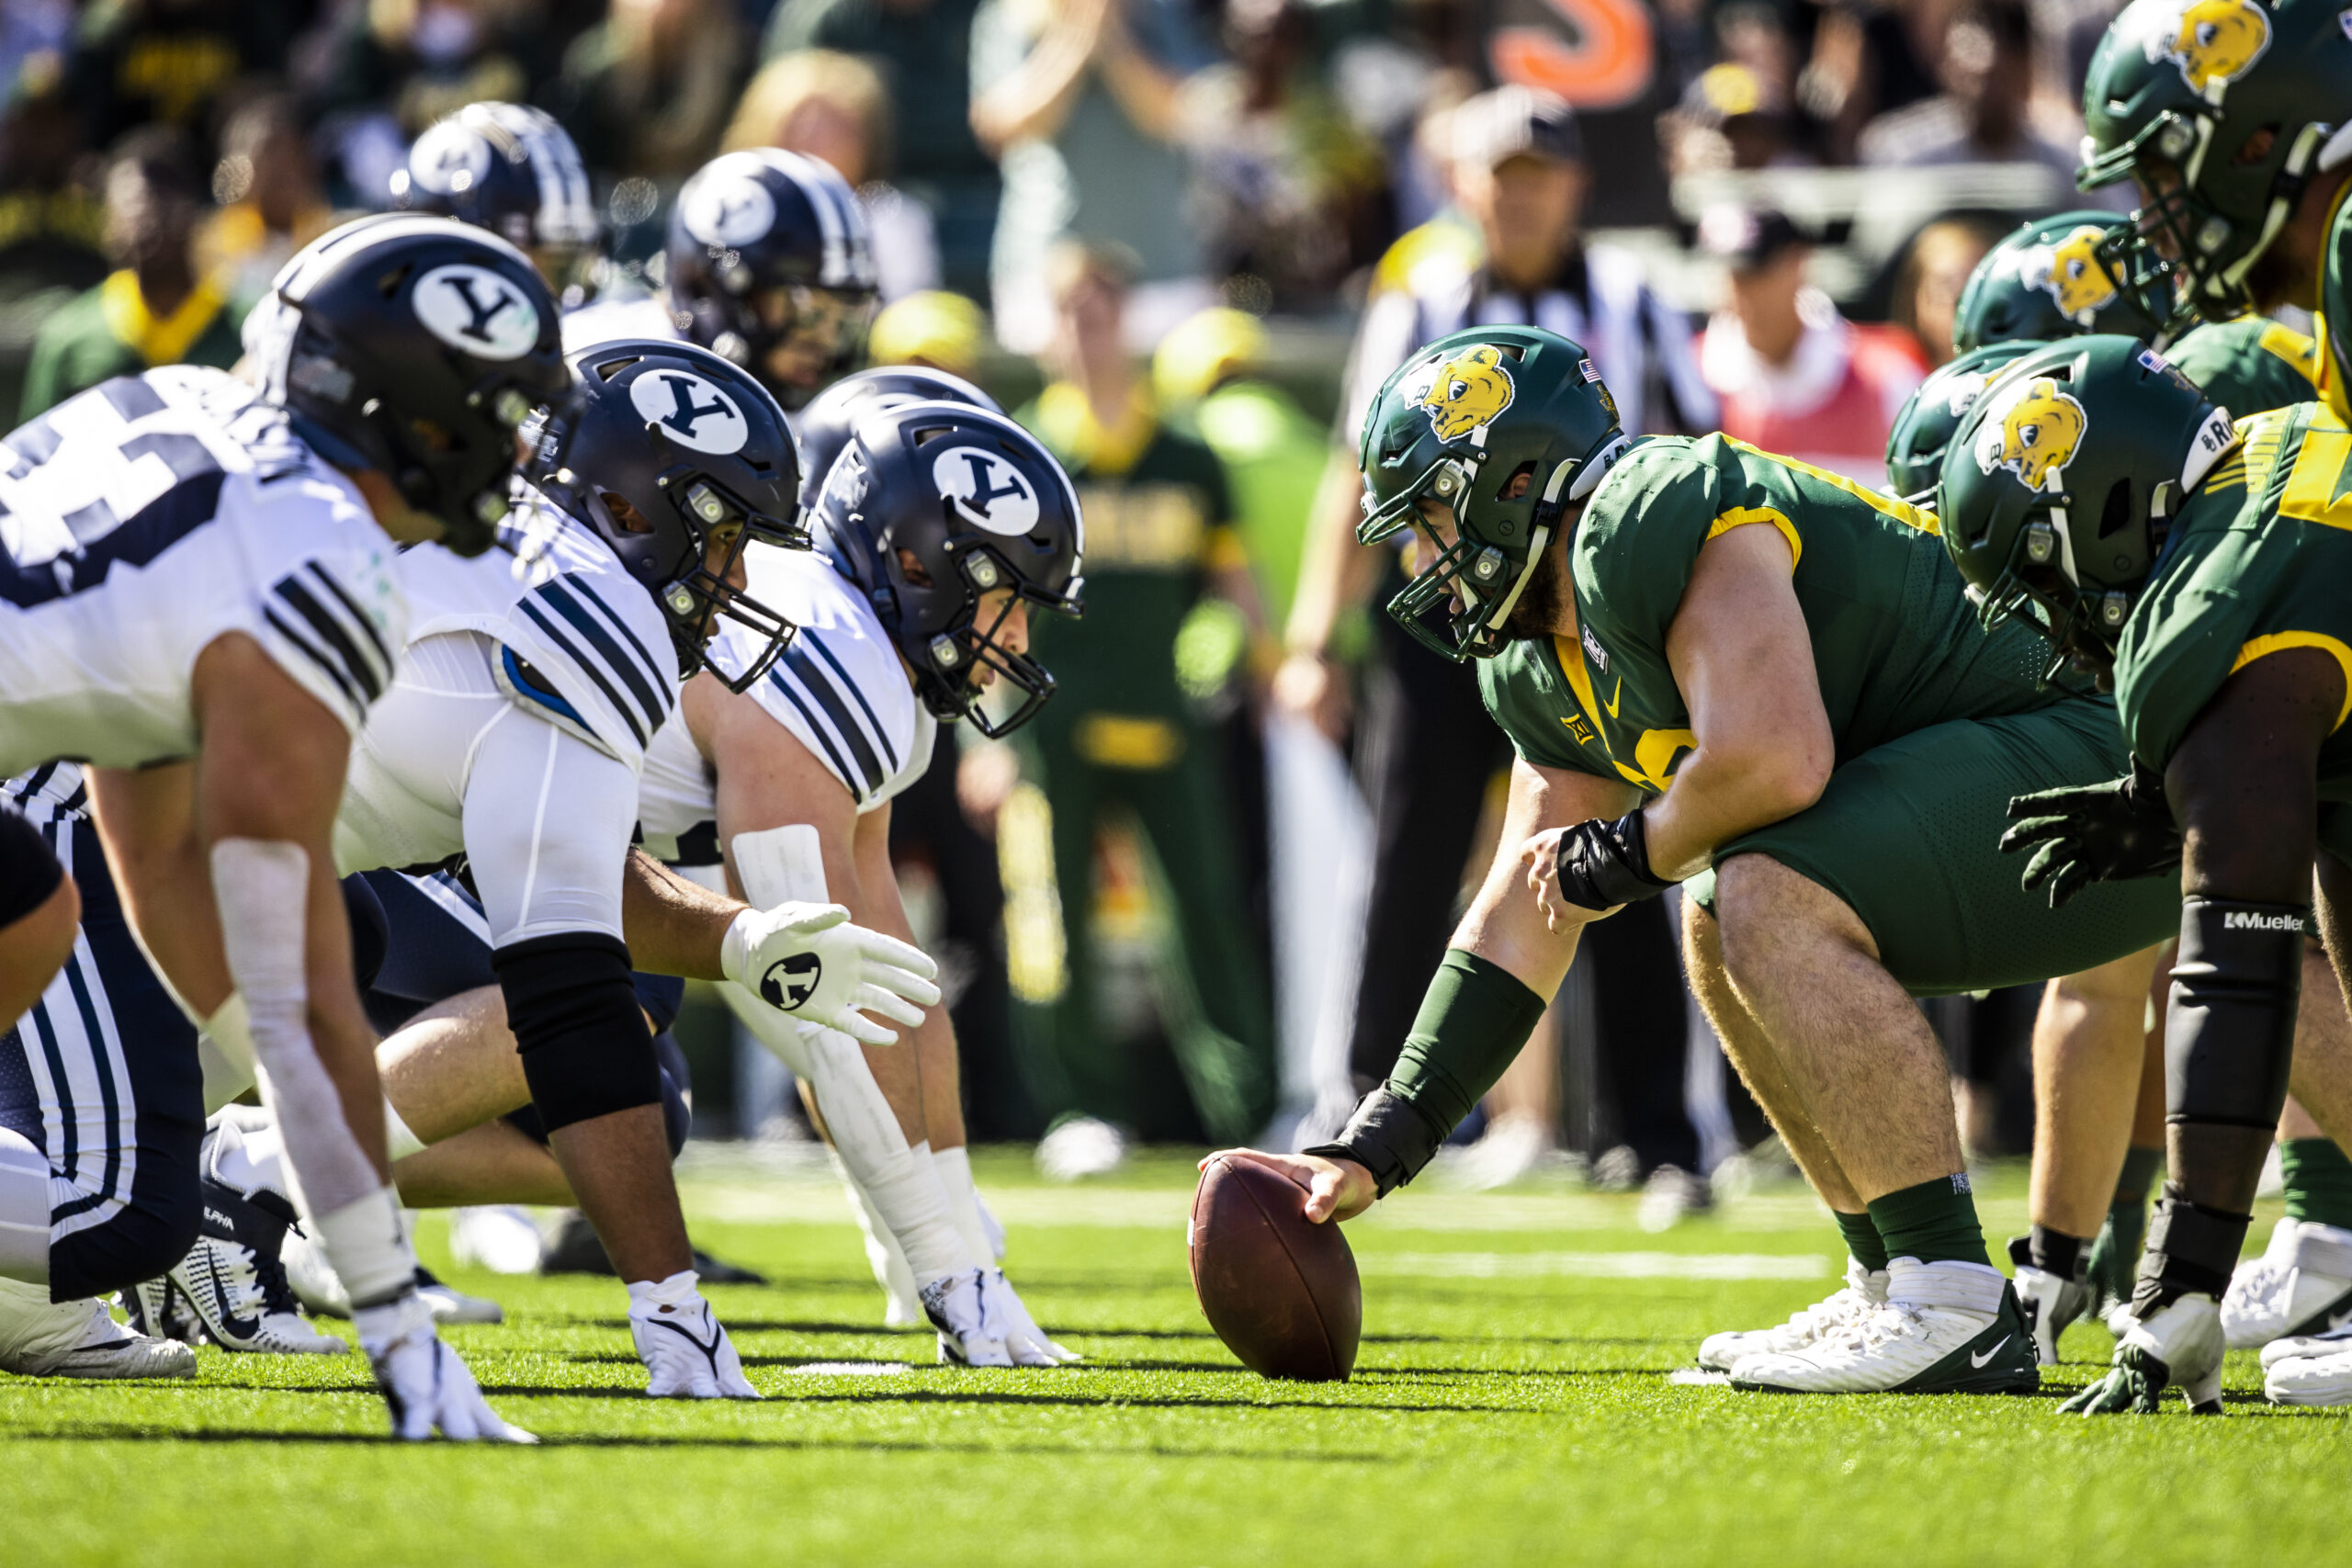 For No. 21 BYU, Saturday against No. 9 Baylor could be an alltimer in